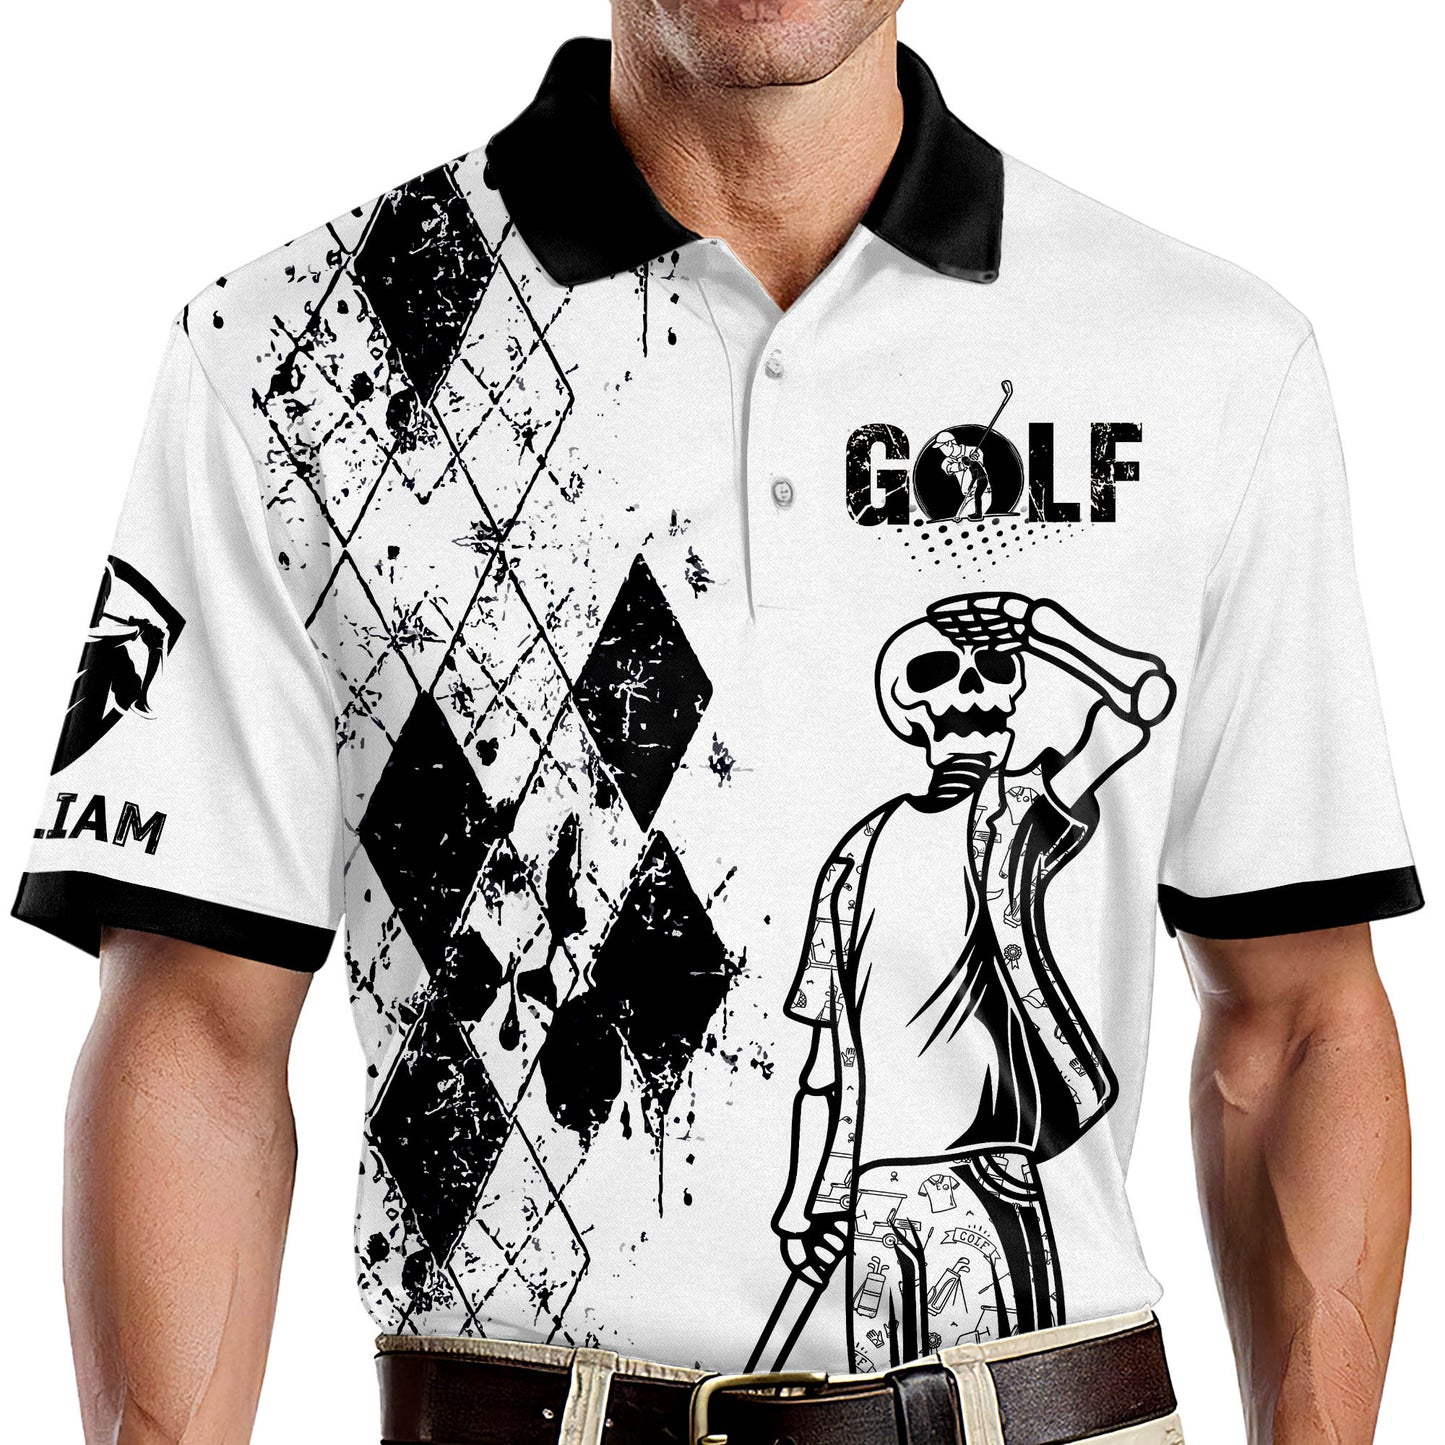 My Balls Are In My Wife's Bag Golf Polo Shirt GM0029